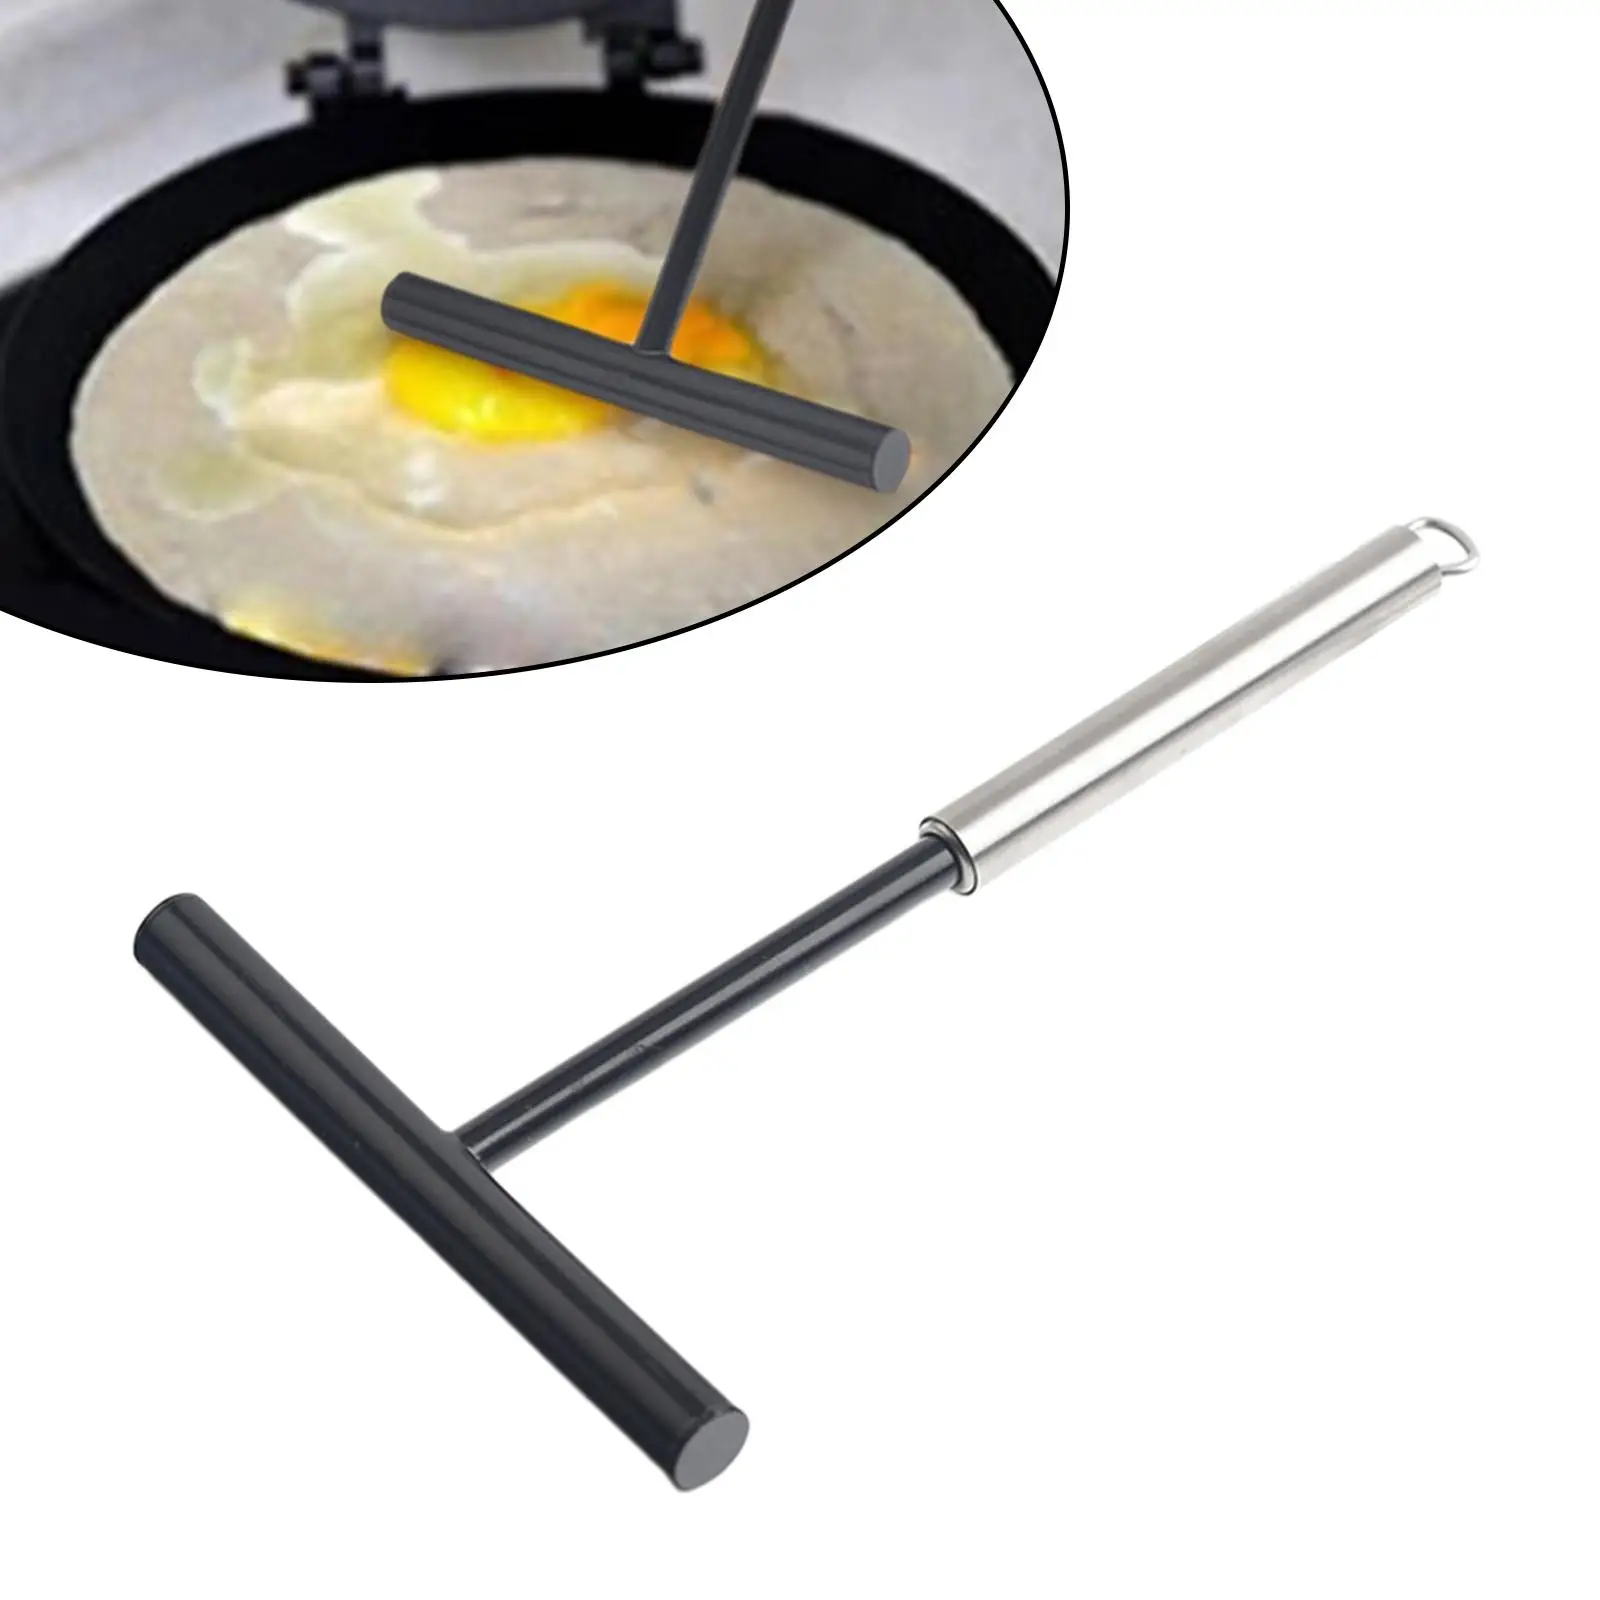 T Shape Crepes Spreader Scraper Cooking Utensils Smooth Surface with Hanging Hole Portable DIY for Kitchen Household